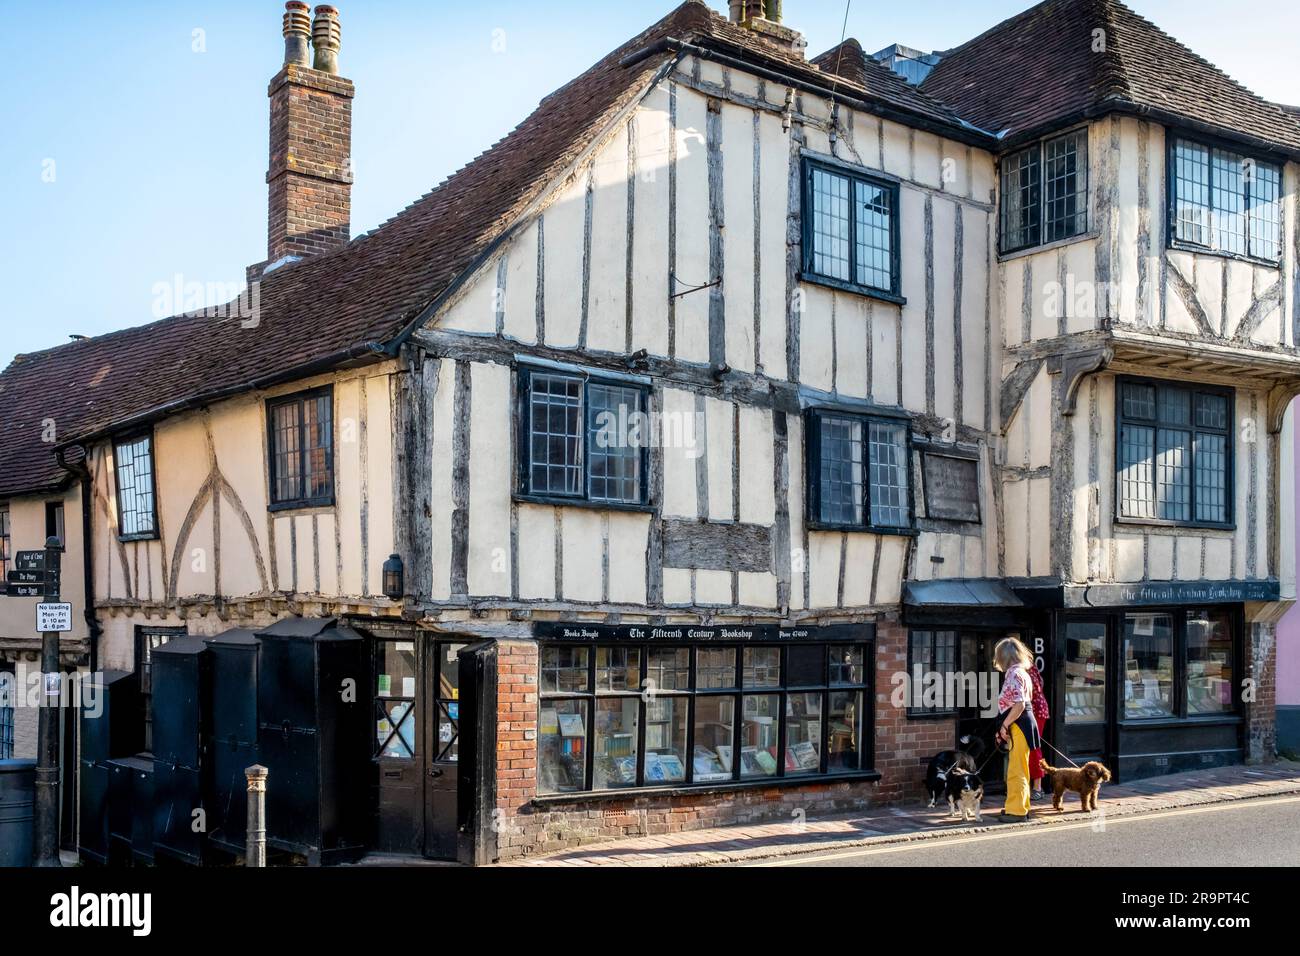 The Fifteenth Century Bookshop a Lewes High Street, Lewes, East Sussex, Regno Unito. Foto Stock